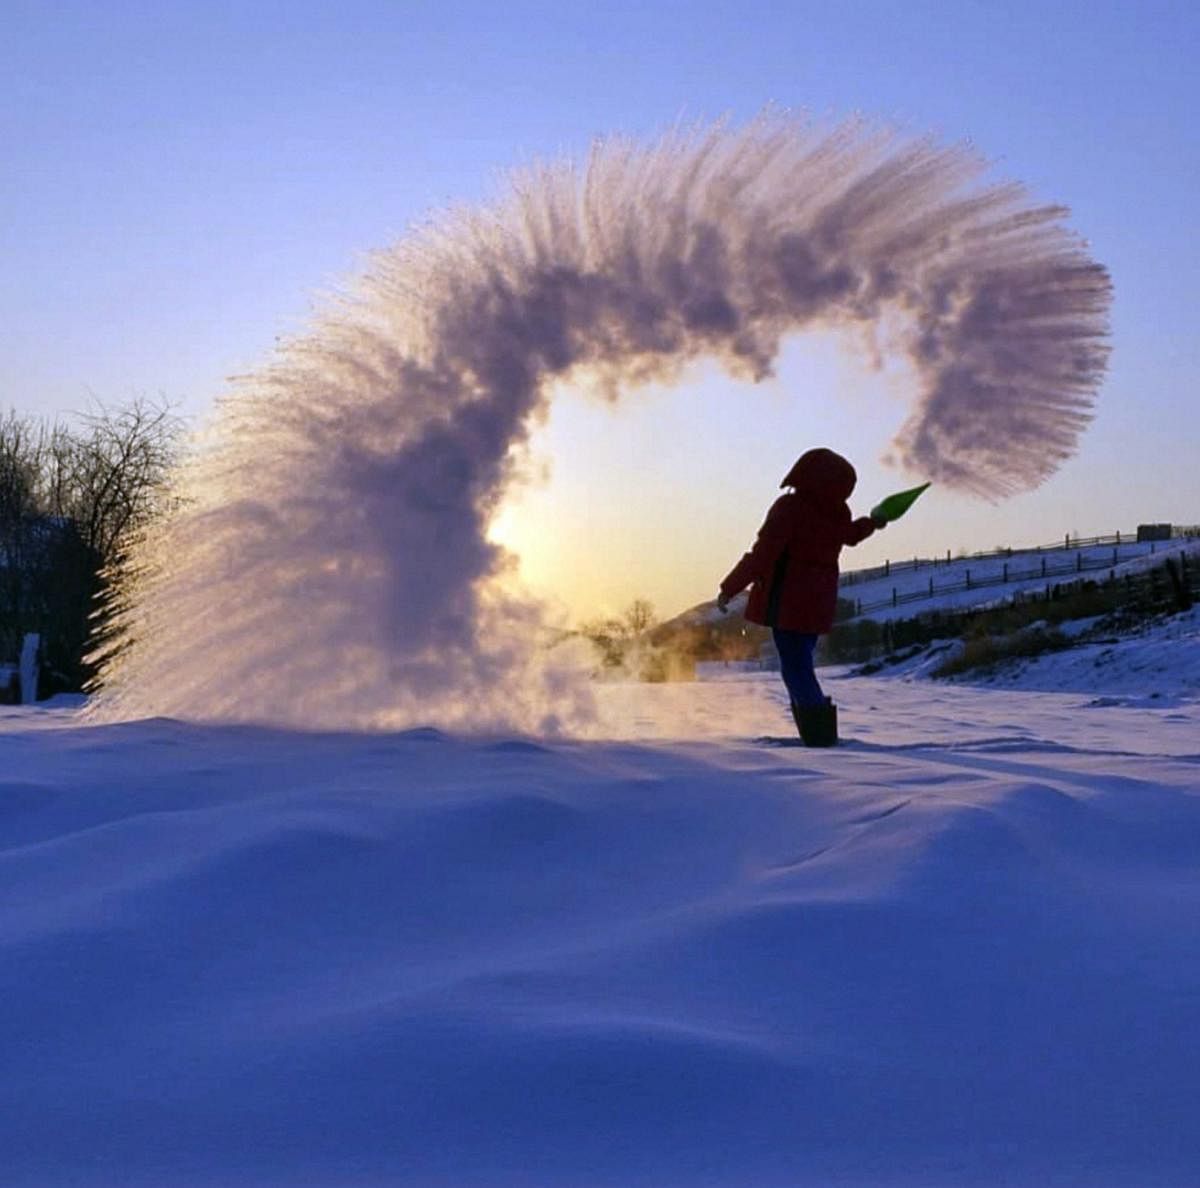  a woman throws boiling water into the freezing air as its instantly condenses into an elaborate pattern of ice crystals in Irkutsk, Russia . Residents of Russia's Urals and Siberia where temperatures recently plunged to minus 40 degrees Fahrenheit have taken to social media to celebrate the cold. Temperatures in Siberia and the Urals earlier this week plunged to around minus 40 degrees Centigrade (minus 40 degrees Fahrenheit) which is unusually low even for the cold-resistant Russians. AP/PTI